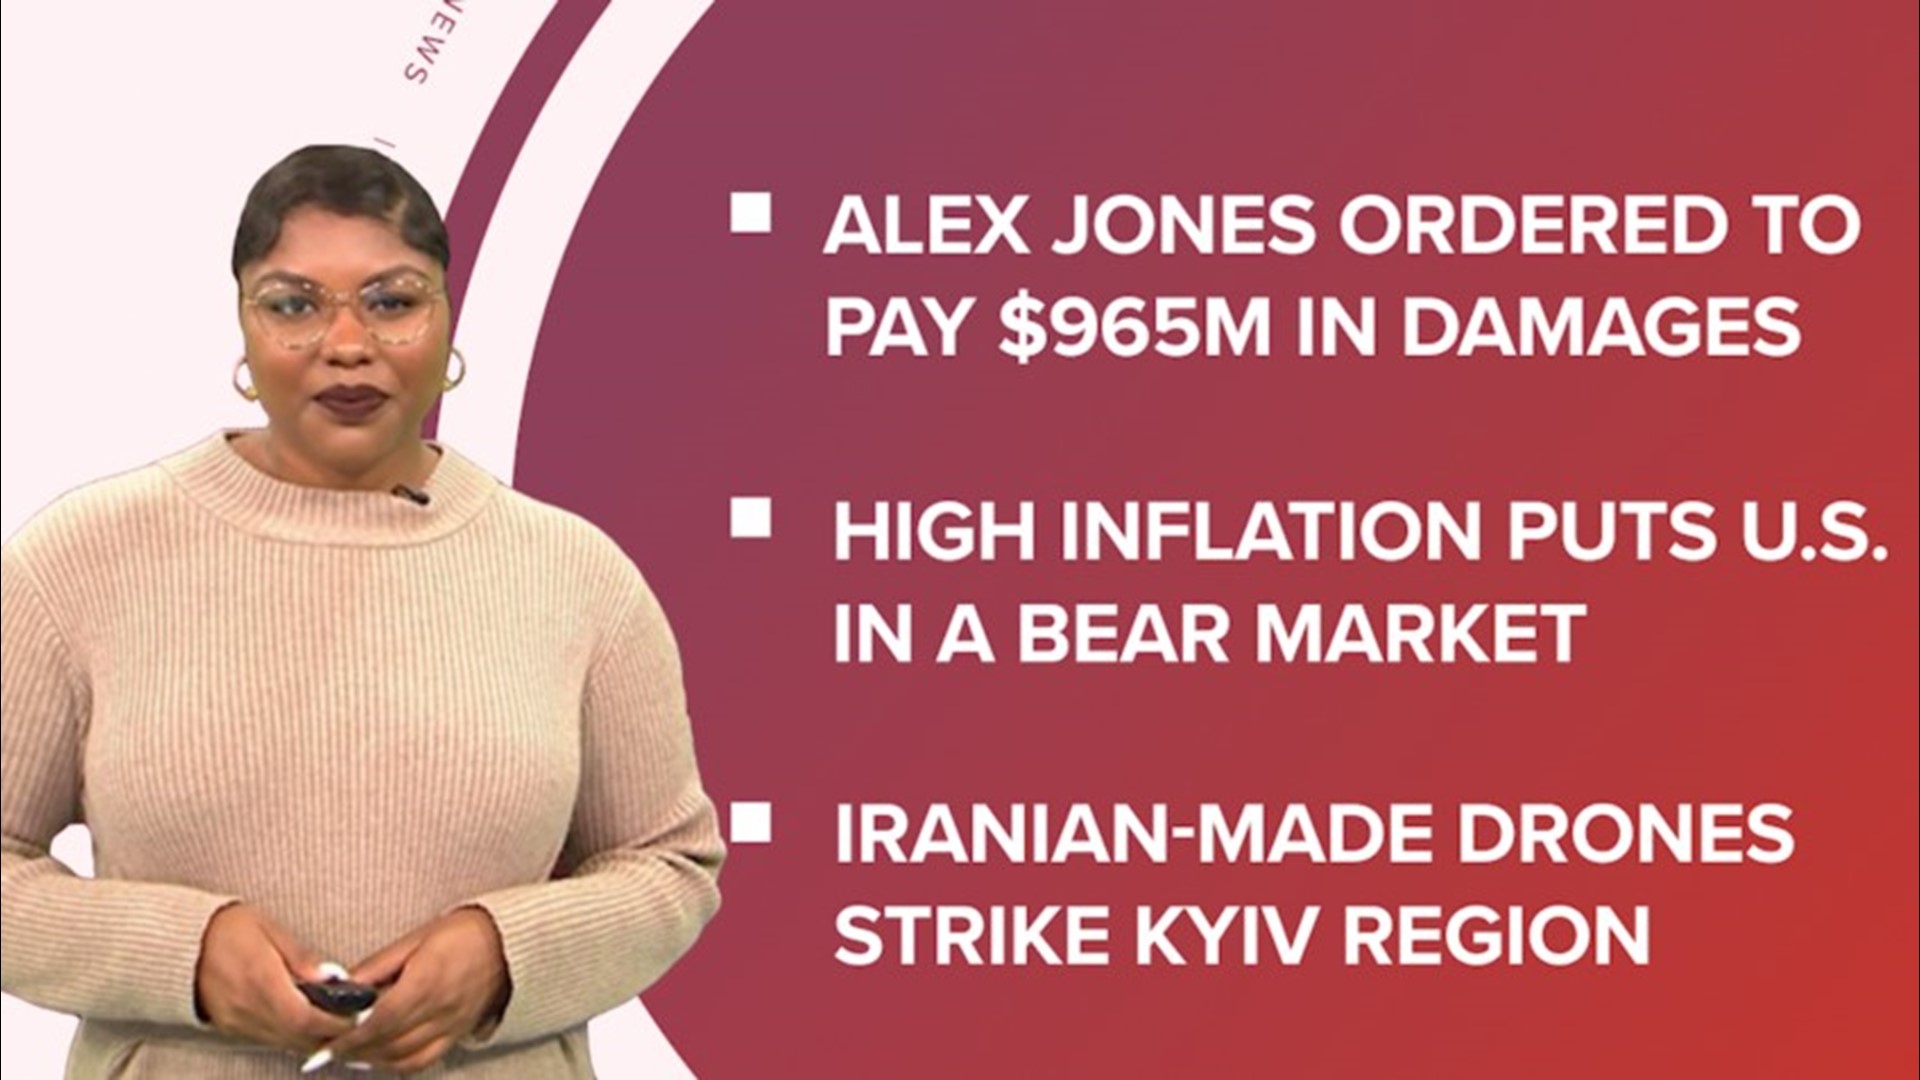 A look at what is happening in the news from Alex  Jones ordered to pay almost $1B to Sandy Hook families to inflation impacting the price of pumpkins.